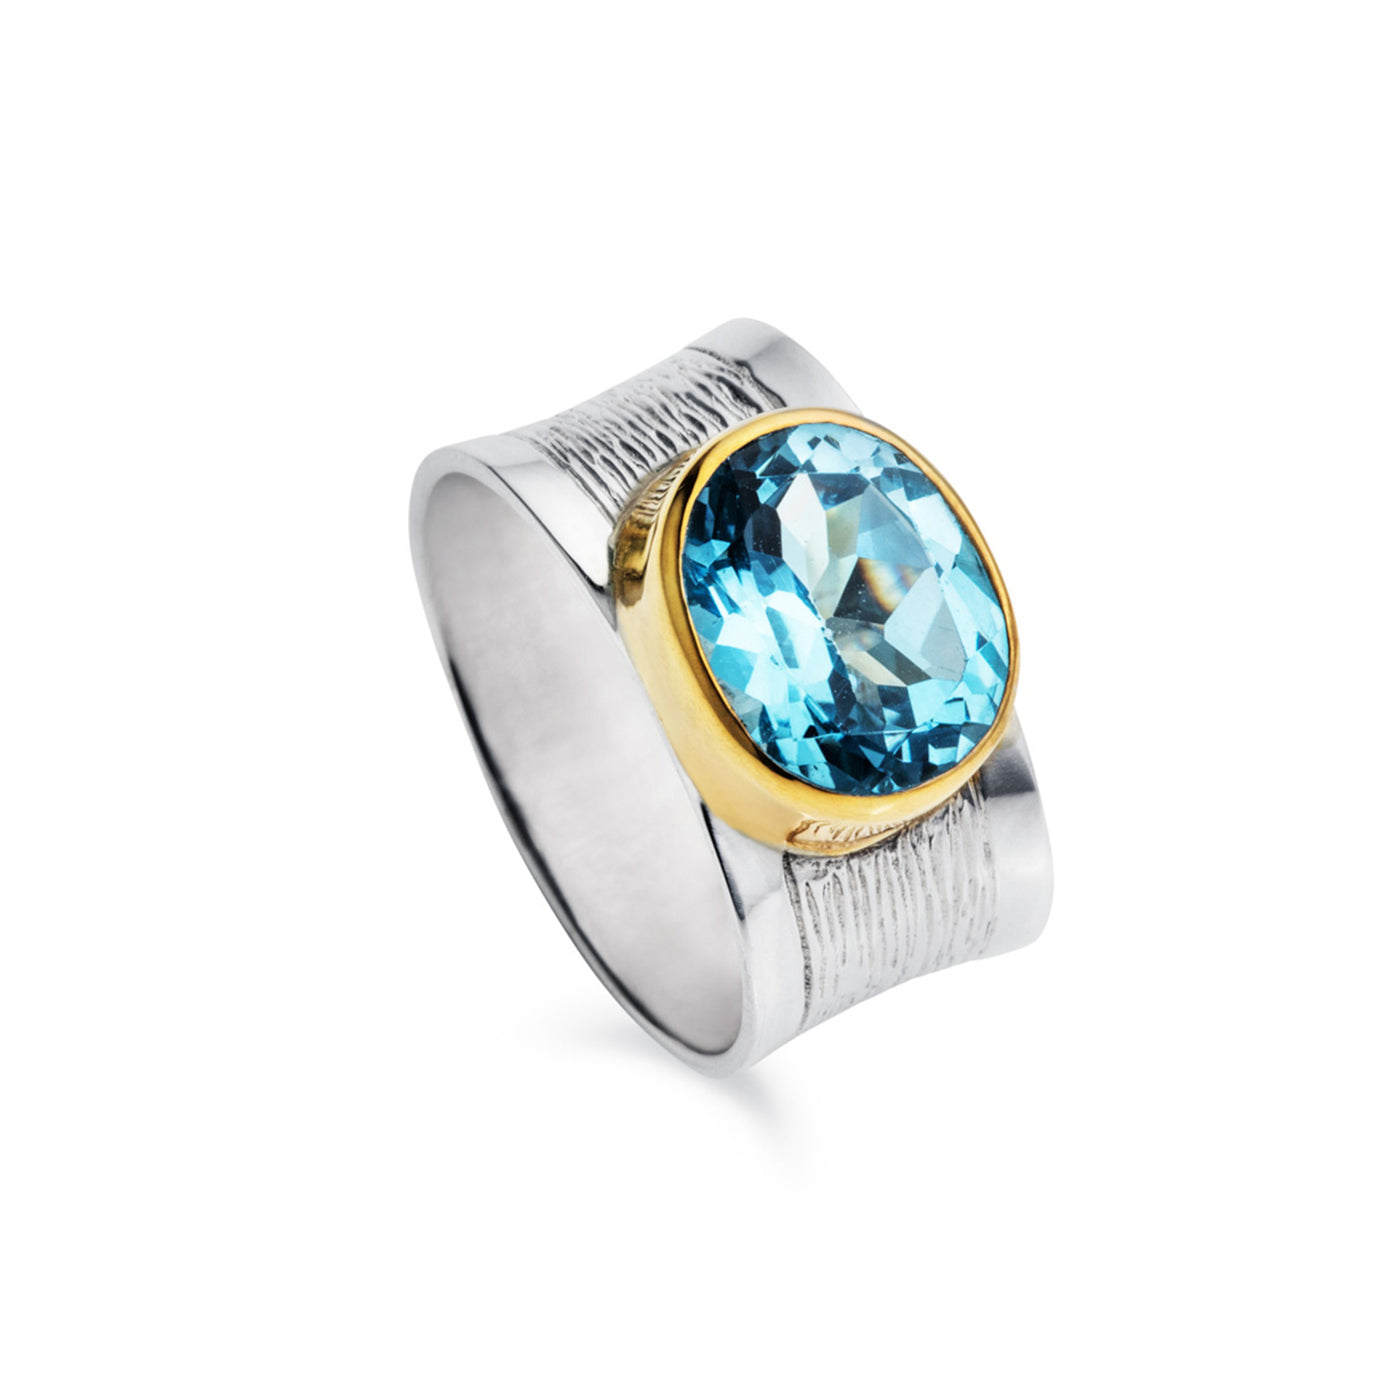 Photo of Large Blue Topaz Ring in Sterling Silver and 18k Gold Vermeil